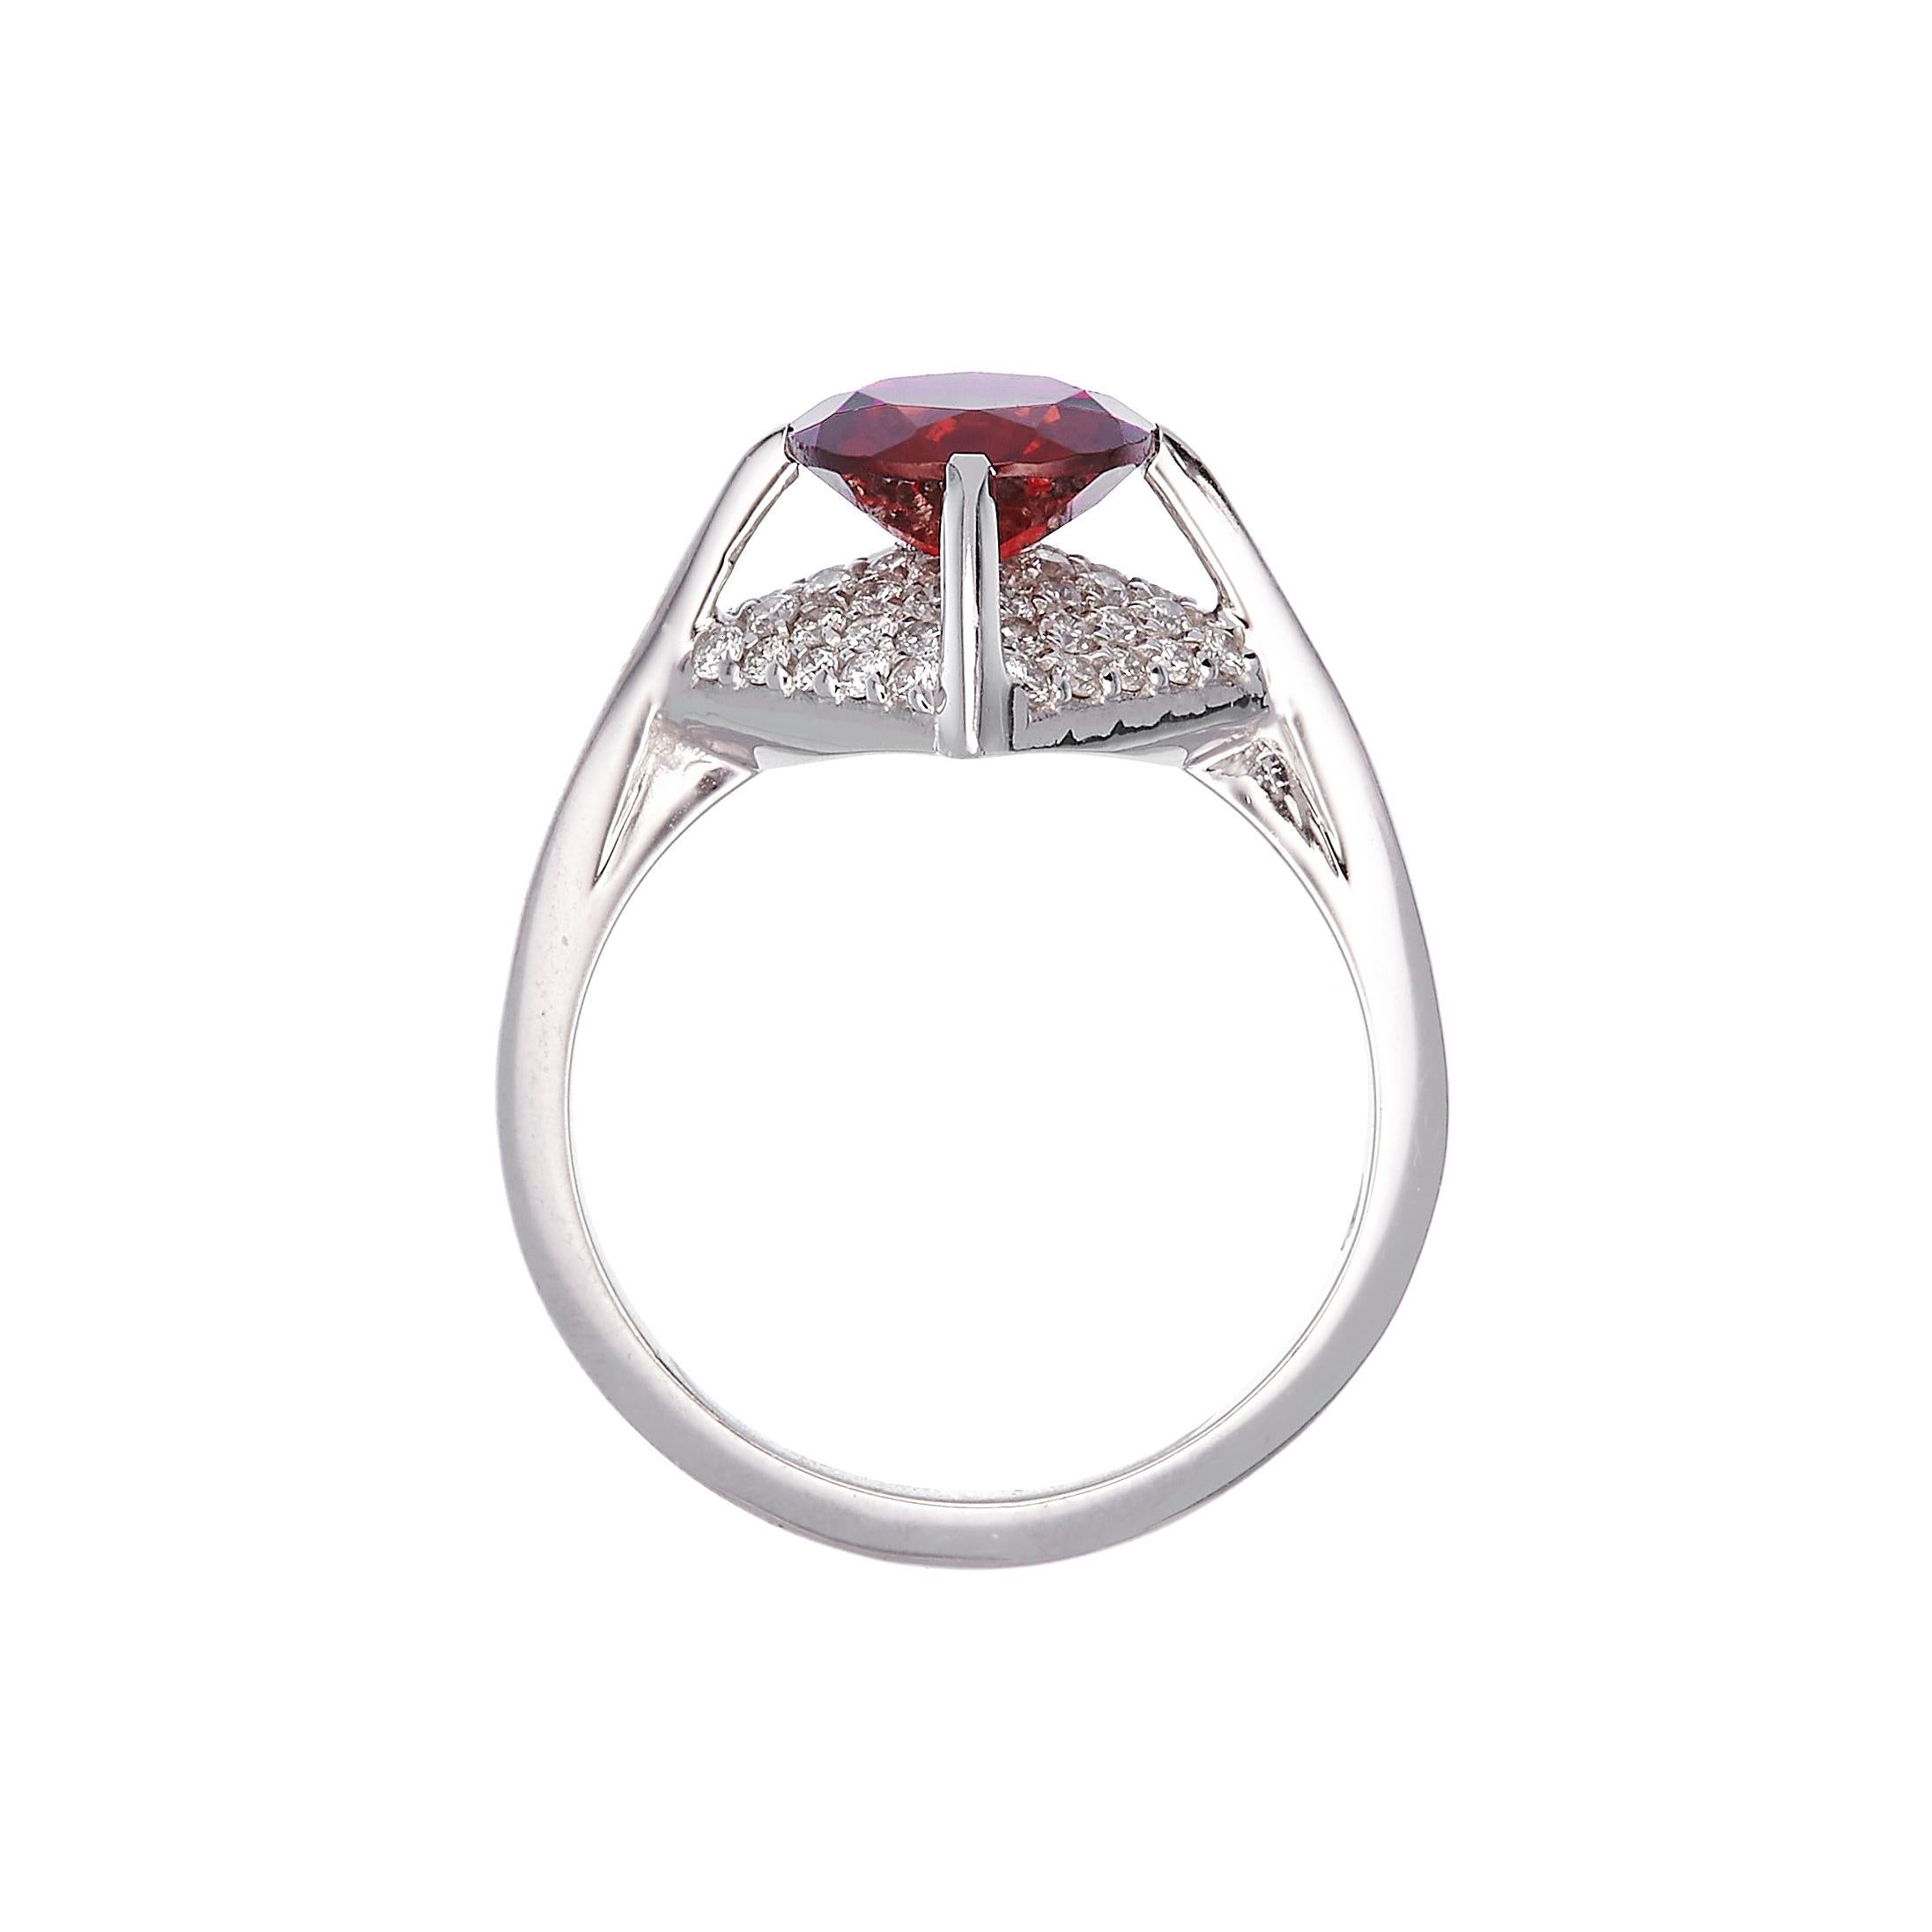 For Sale:  18K White Gold Made in Italy Diamond Rodolite Garnet Vogue Awarded Cocktail Ring 4